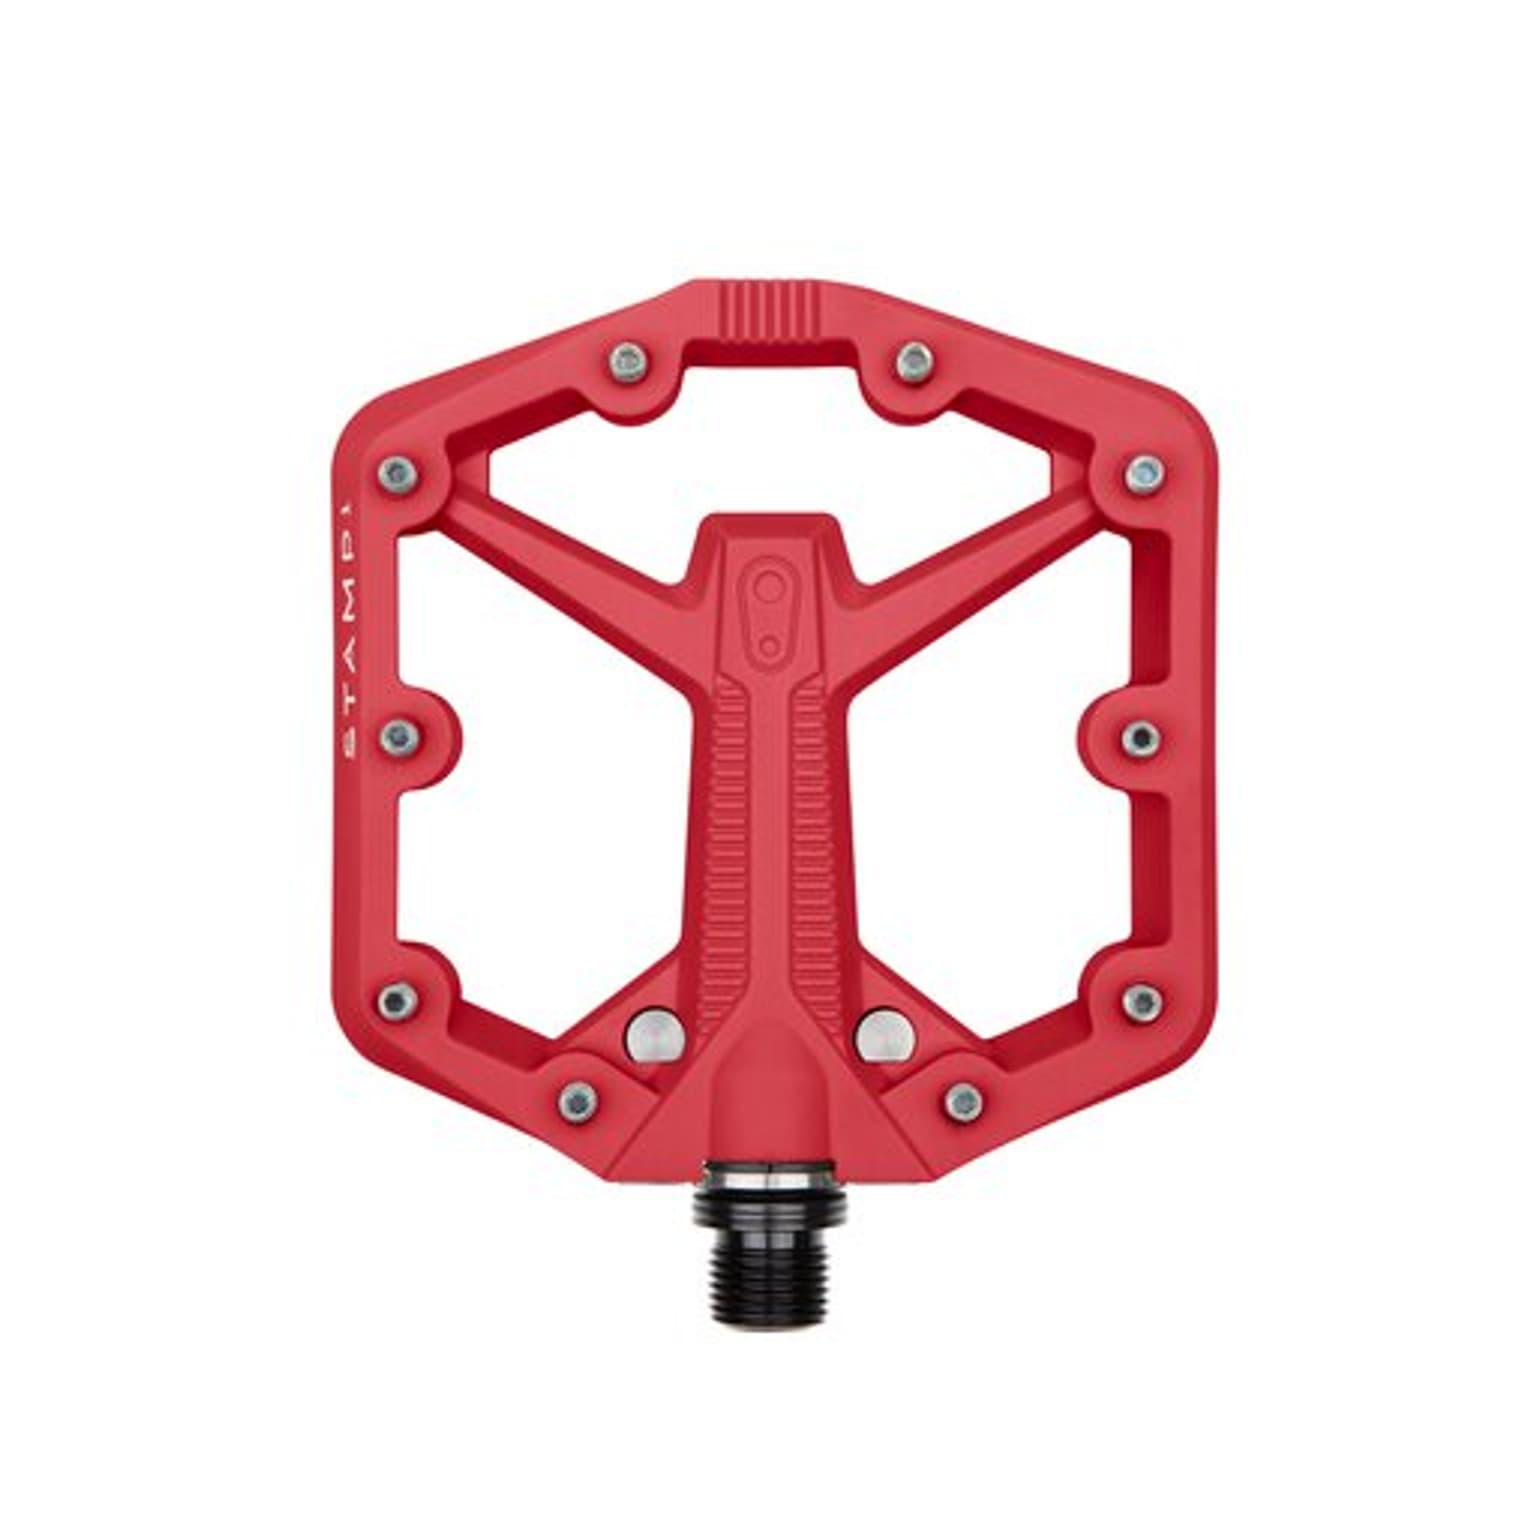 crankbrothers crankbrothers Pedal Stamp 1 small Pedale 1